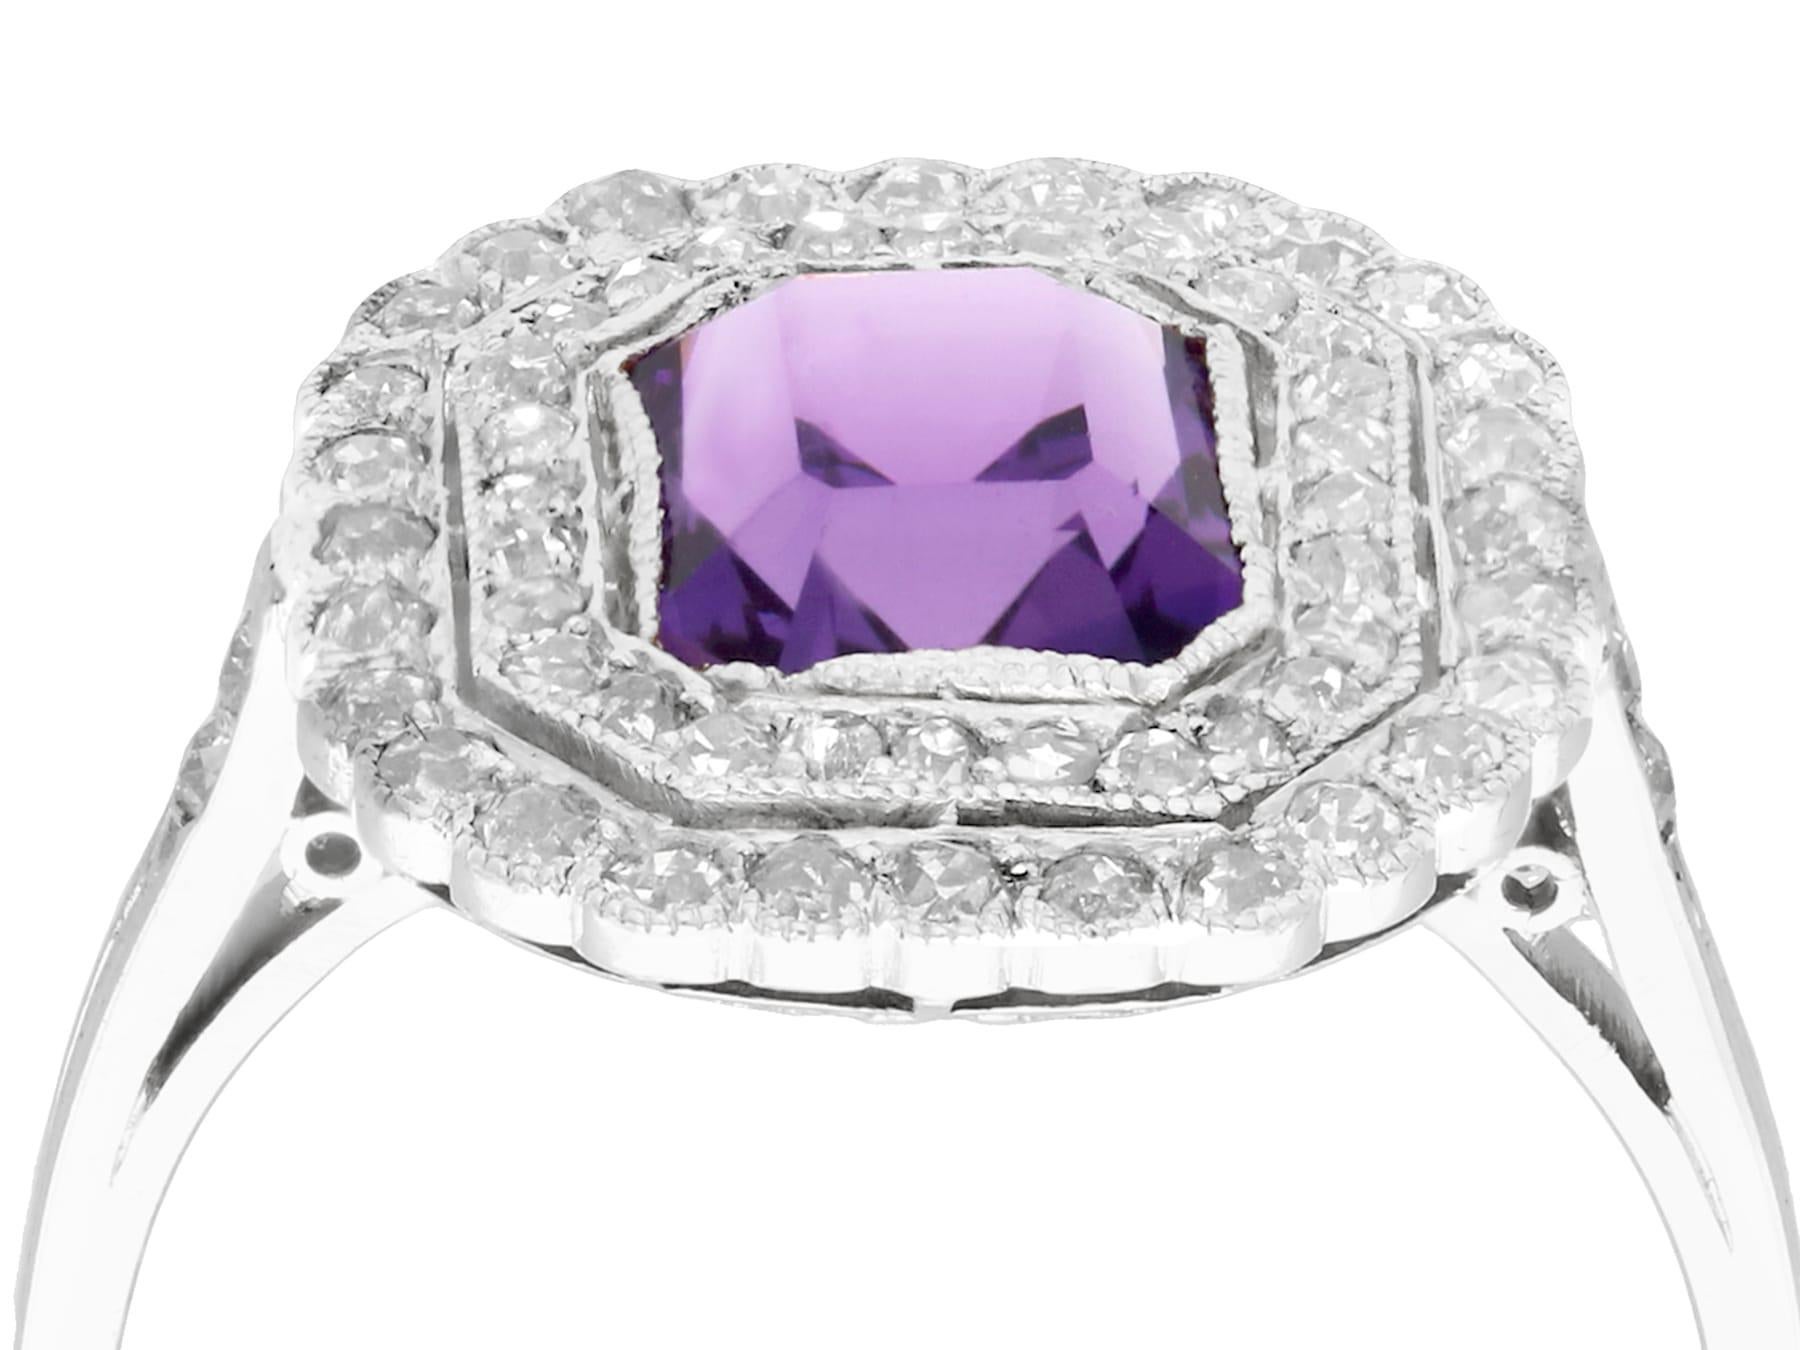 A stunning, fine and impressive antique 1.92 carat amethyst and 1.20 carat diamond, platinum dress ring; part of our diverse antique jewelry collections.

This stunning antique amethyst and diamond ring has been crafted in platinum.

The platinum